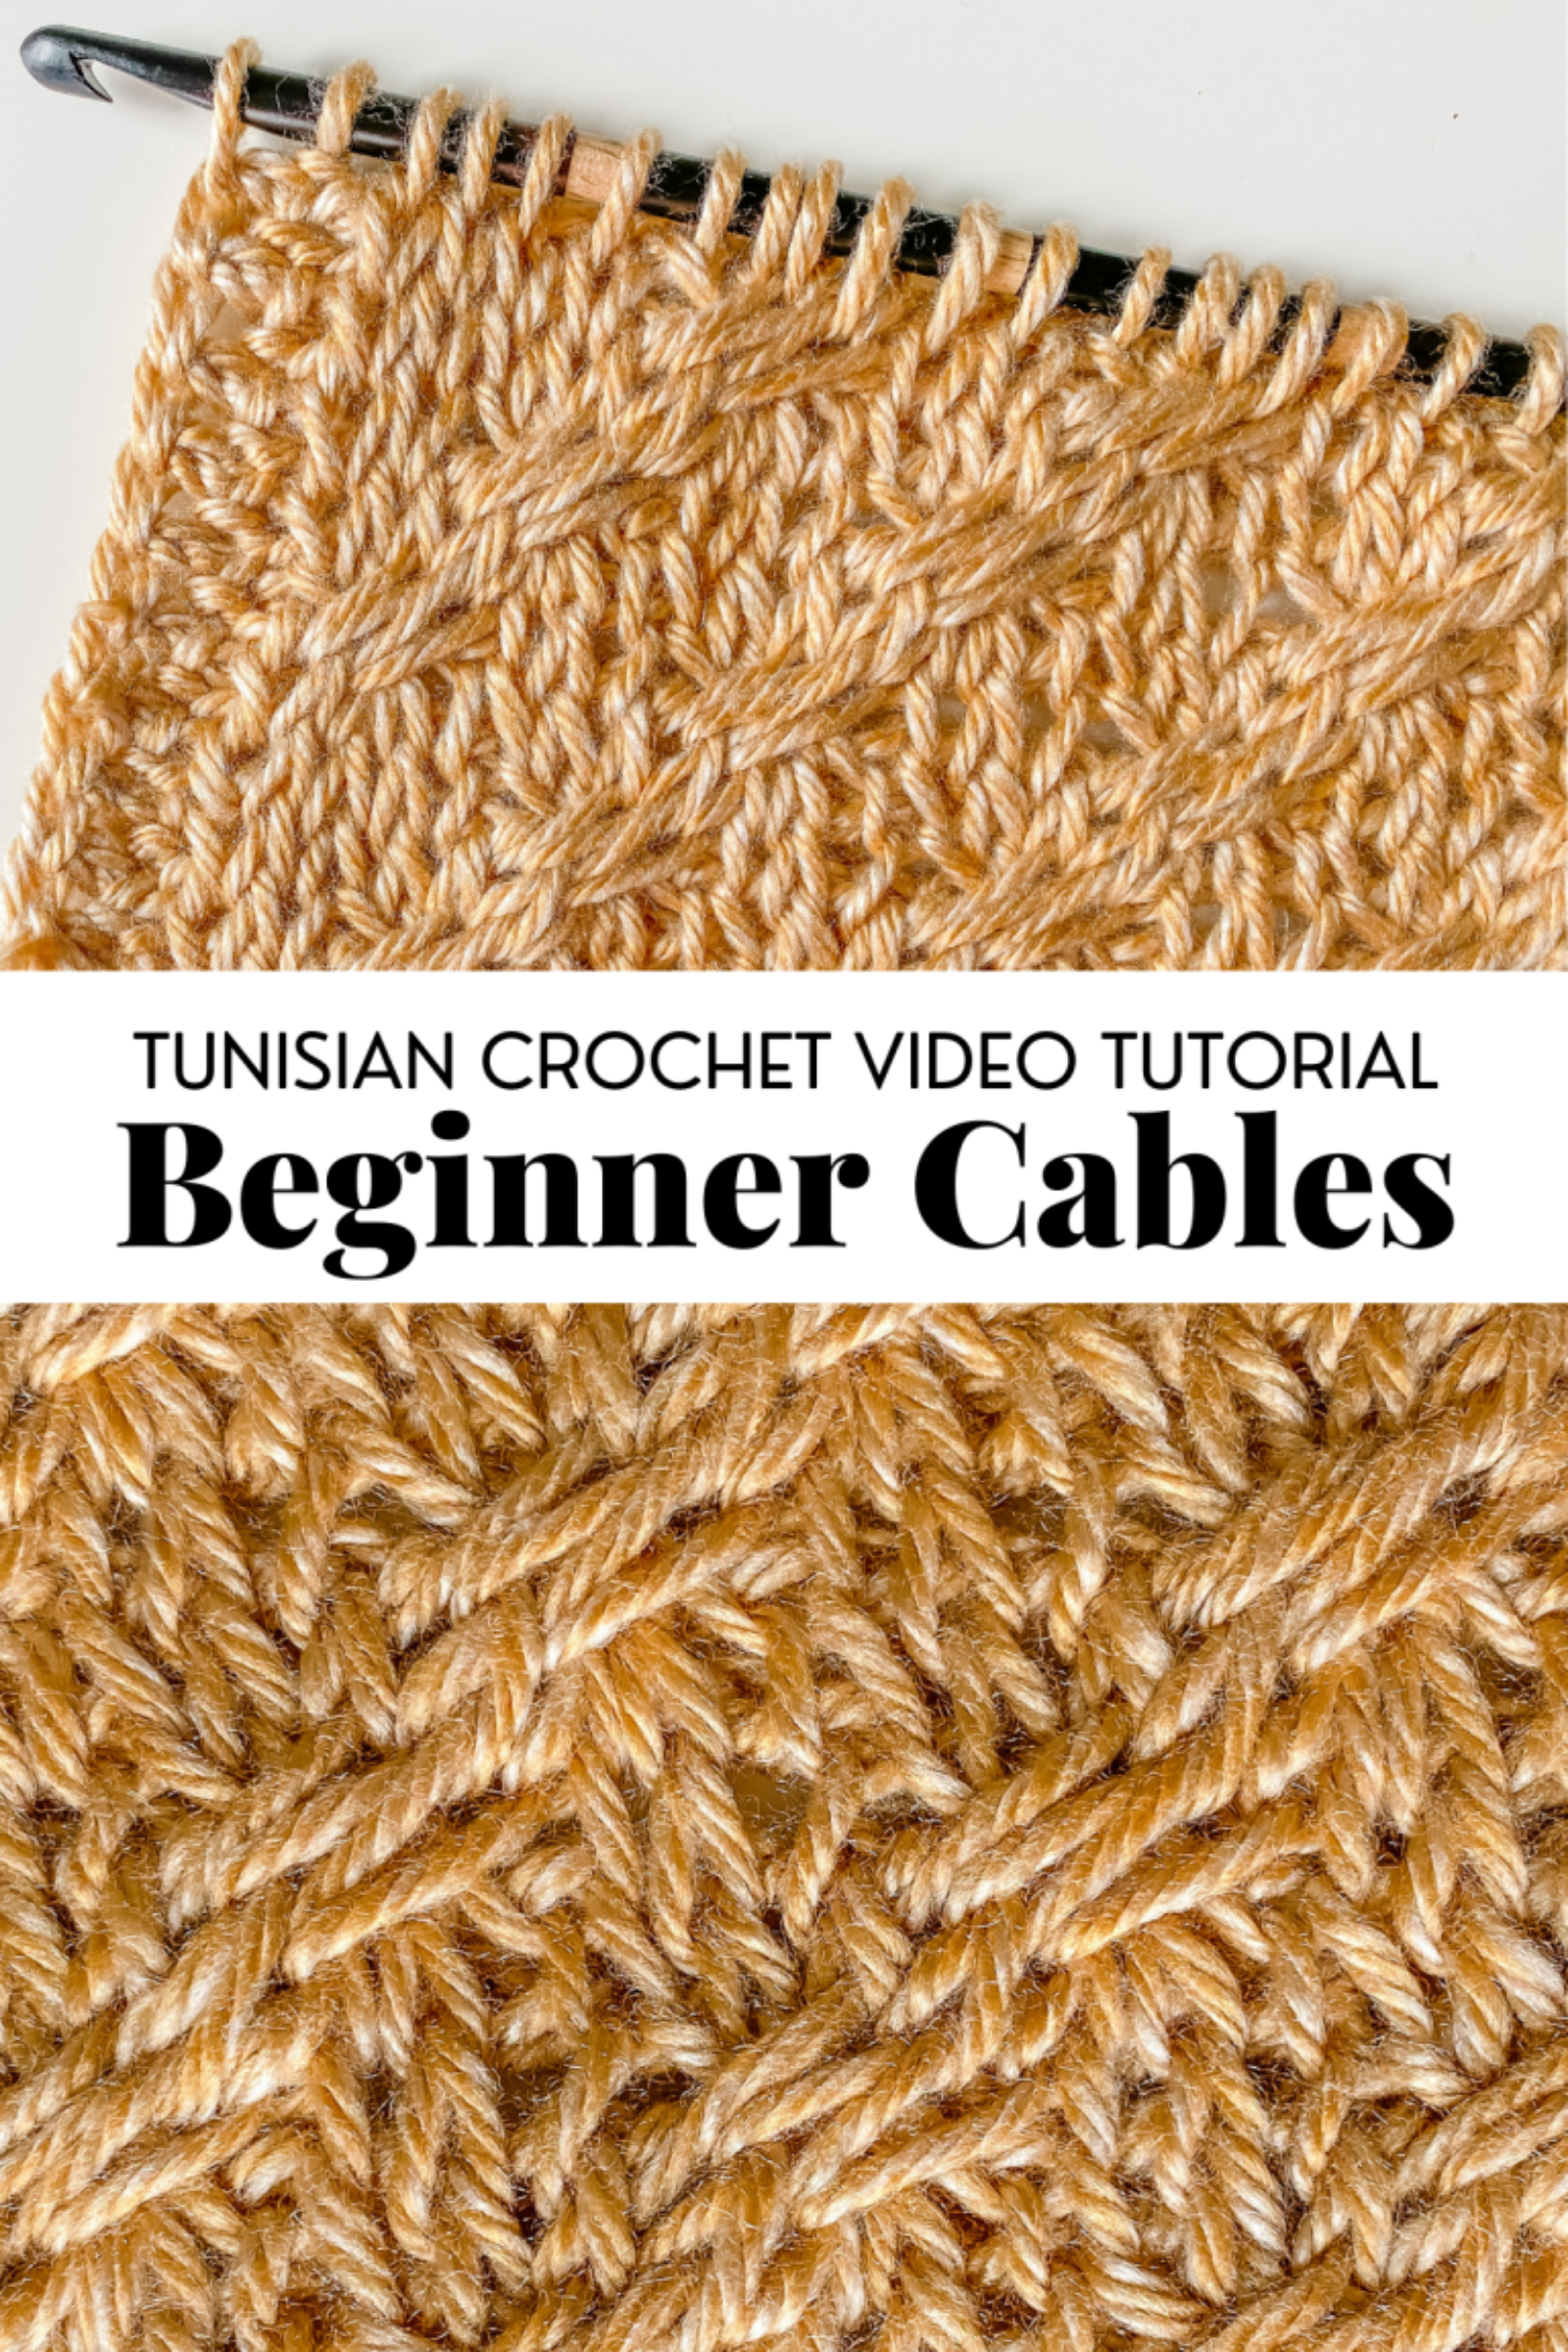 Beginner Cables